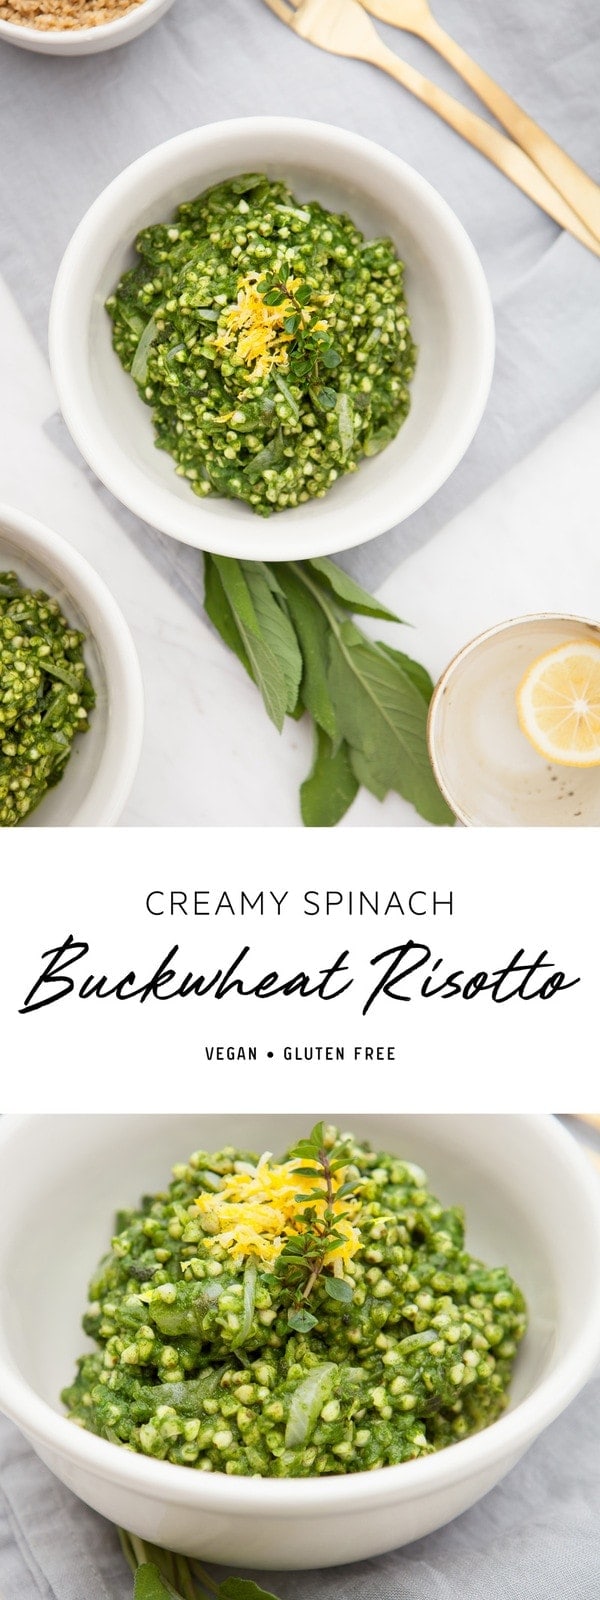 A ridiculously quick creamy Buckwheat Risotto made with spinach, fresh herbs and coconut. The perfect simple dinner recipe. #veganrisotto #buckwheatrisotto #glutenfreerisotto #spinachbuckwheatrisotto #veganrisottorecipe #veganmealideas #vegandinnerideas #plantbaseddinnerideas #whole30recipeideas #whole30dinnerideas #healthydinnerideas #familydinnerideas #plantbaseddinner #plantbasedrecipes #quickvegandinnerideas #AscensionKitchen // Pin to your own inspiration board! // 